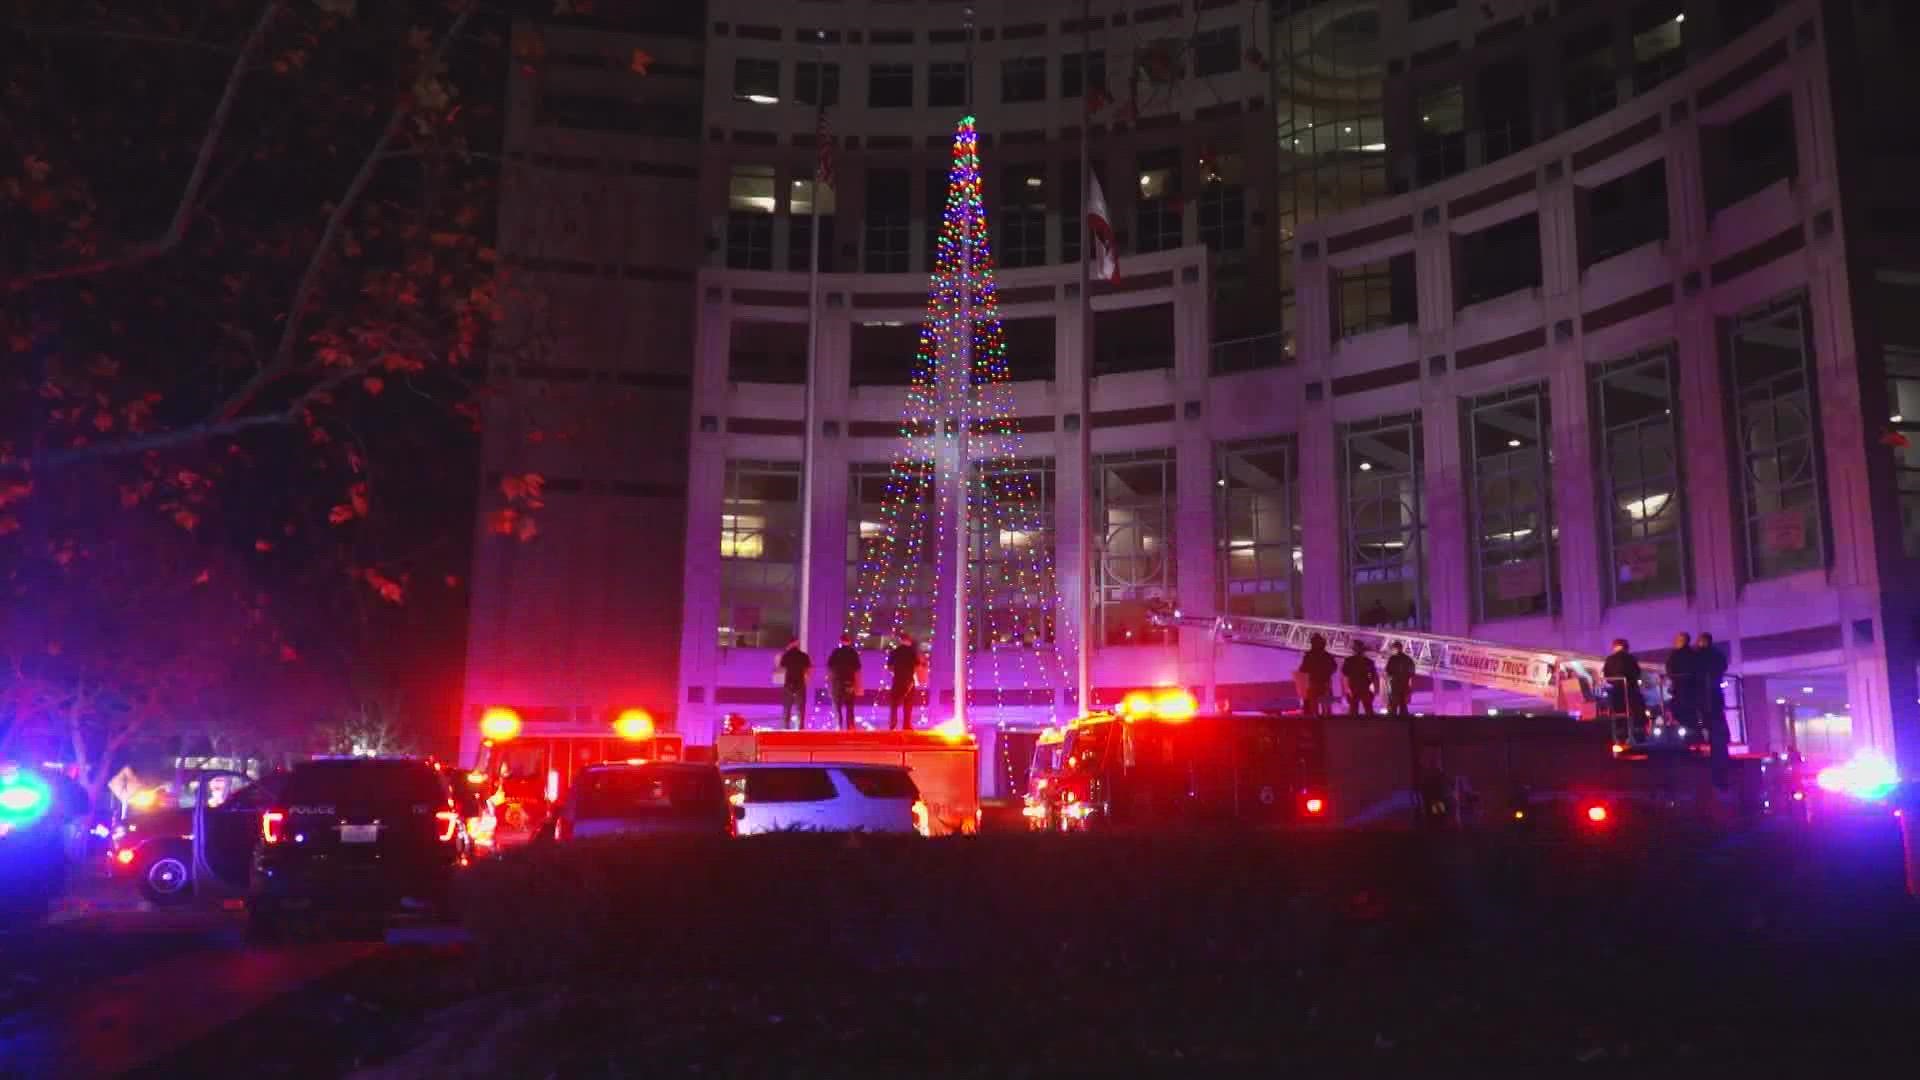 Sacramento police and fire departments filled the night sky with flashing lights for children spending their holidays at the hospital